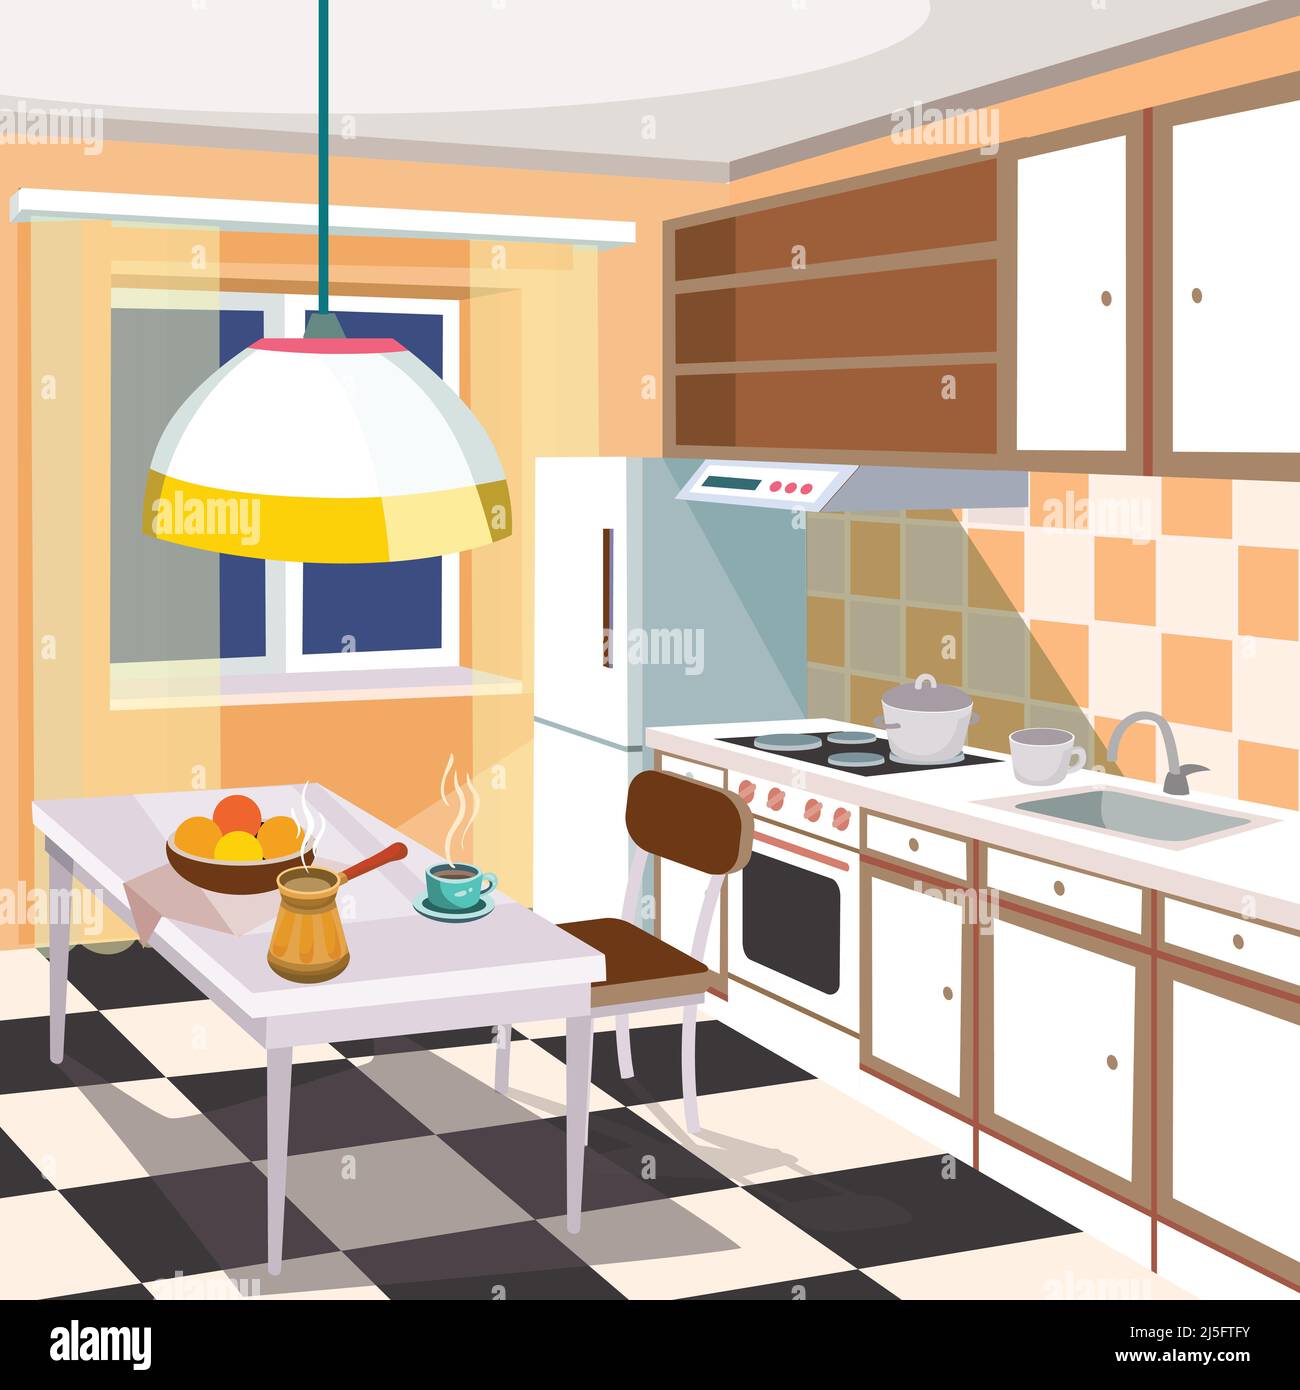 Vector cartoon illustration of a retro kitchen interior with kitchen cabinets, a dining table with a cup of hot coffee and fruits, a refrigerator, a c Stock Vector